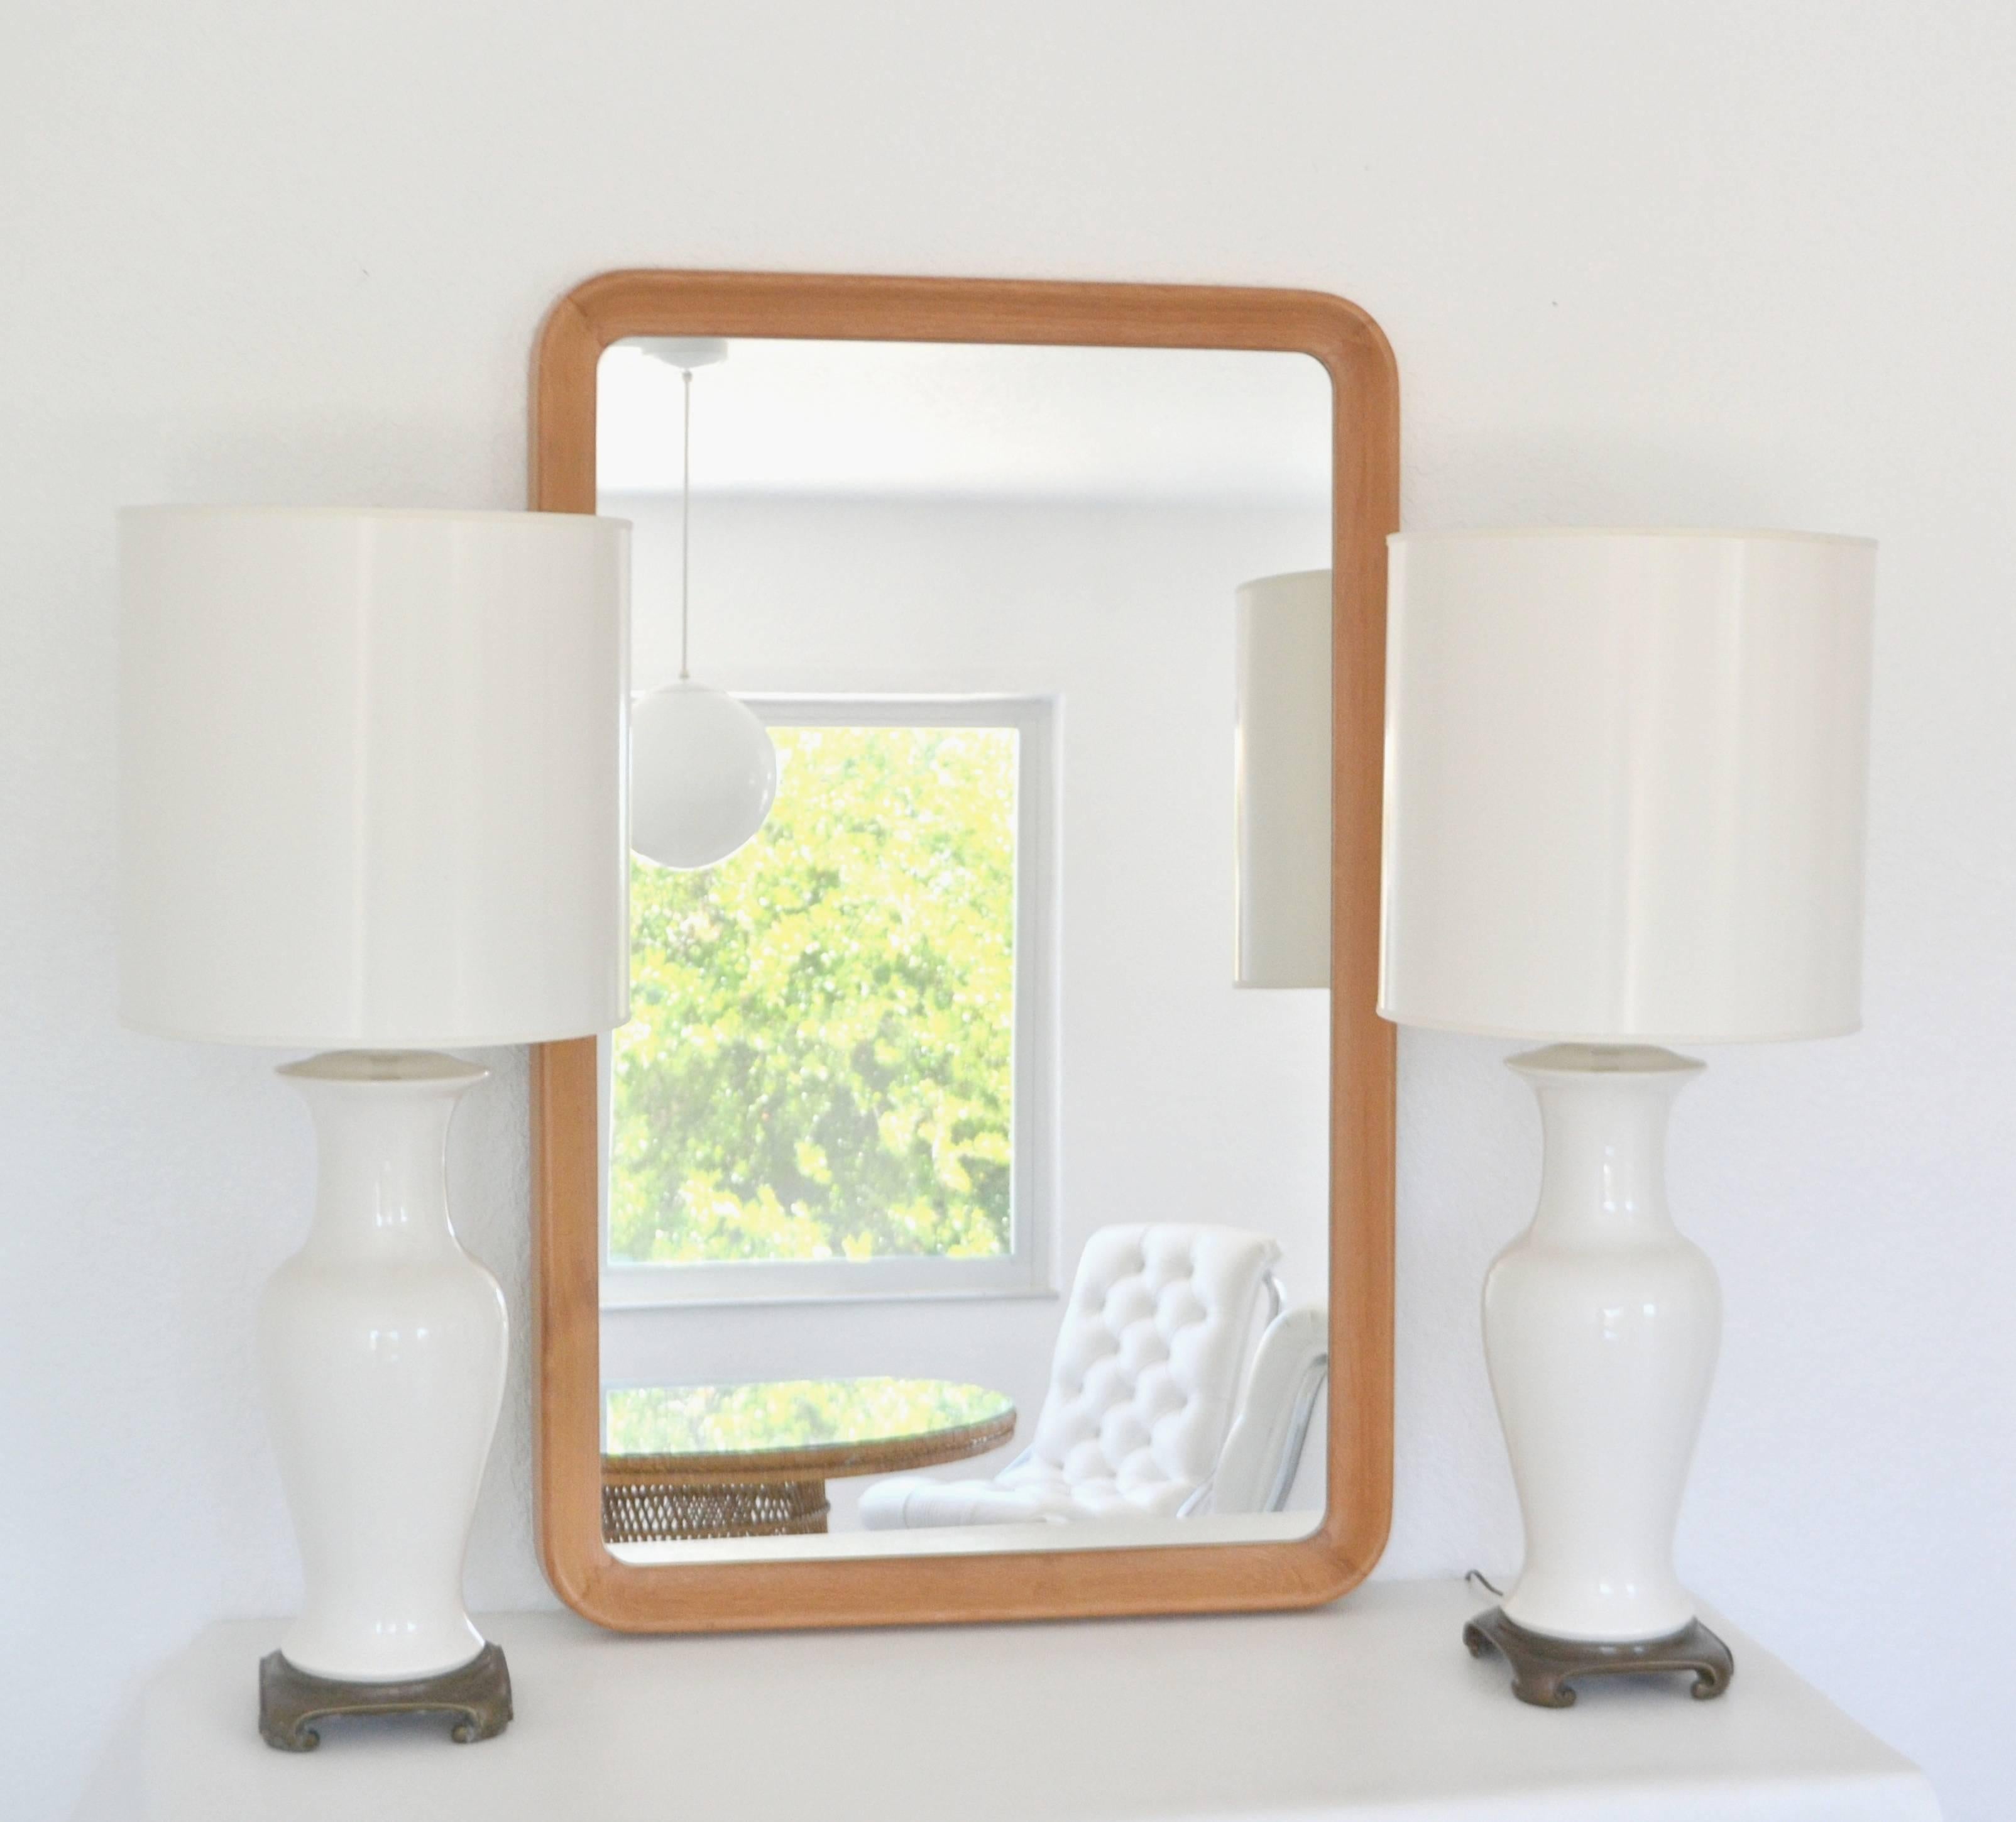 Striking midcentury teak rectangular form wall mirror, circa 1960s-1970s. This sleek and sculptural mantel mirror is designed with a deep concave teak surround frame with rounded corners.